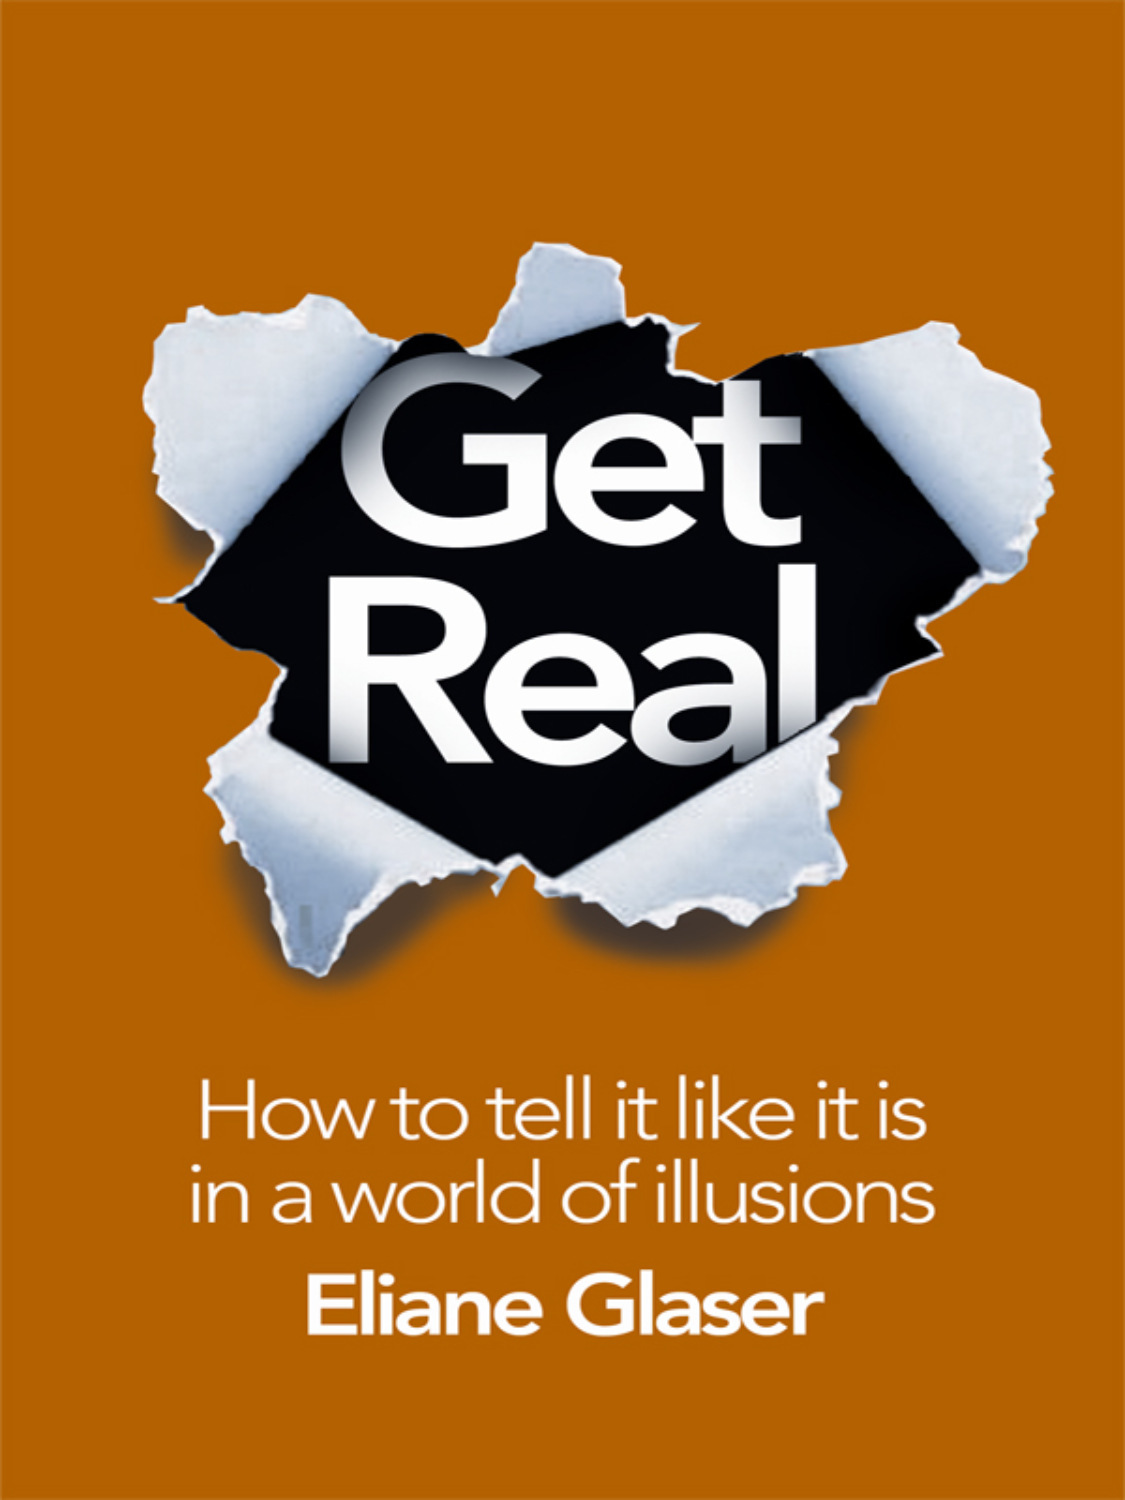 Go and get books. Get real. Like it.